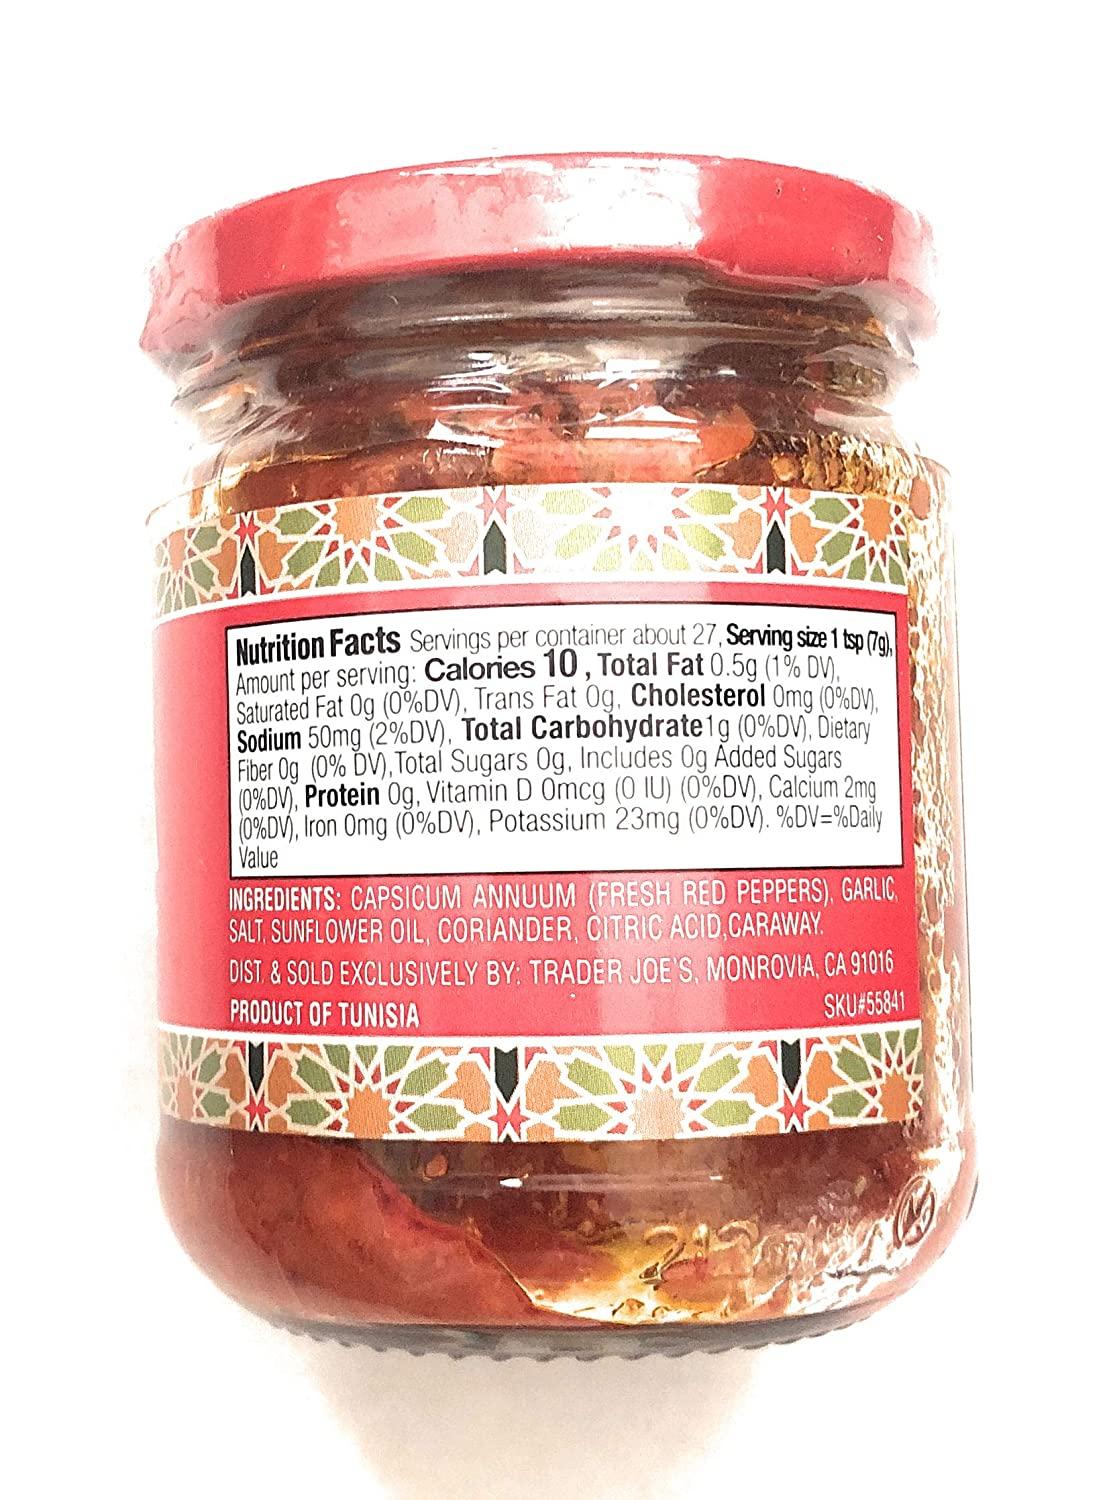 Trader Joe's Traditional Tunisian Harissa Hot Chili Pepper Paste With Herbs  & Spices, 6 oz Jar (Single)